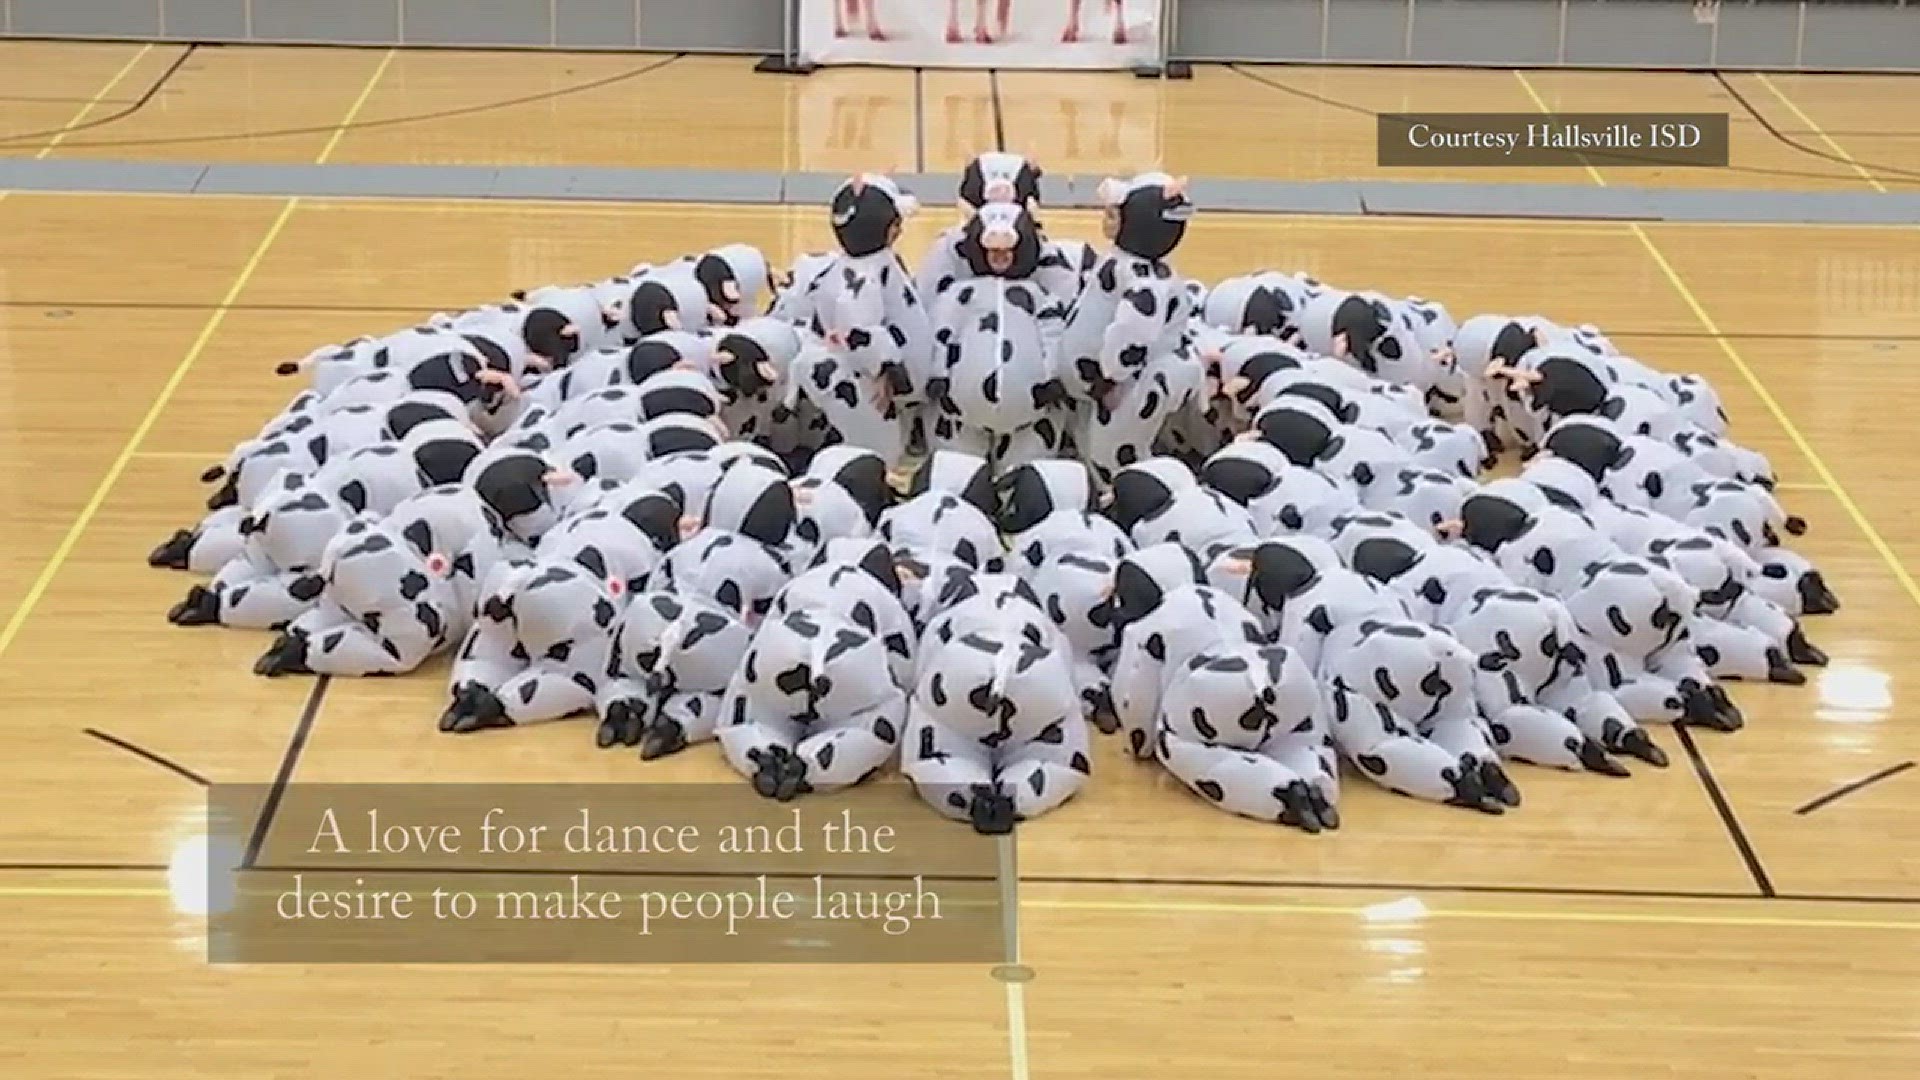 The young women of Hallsville High School Belles are now famous for their viral 'Cow Dance' performed at a recent dance competition in Dallas